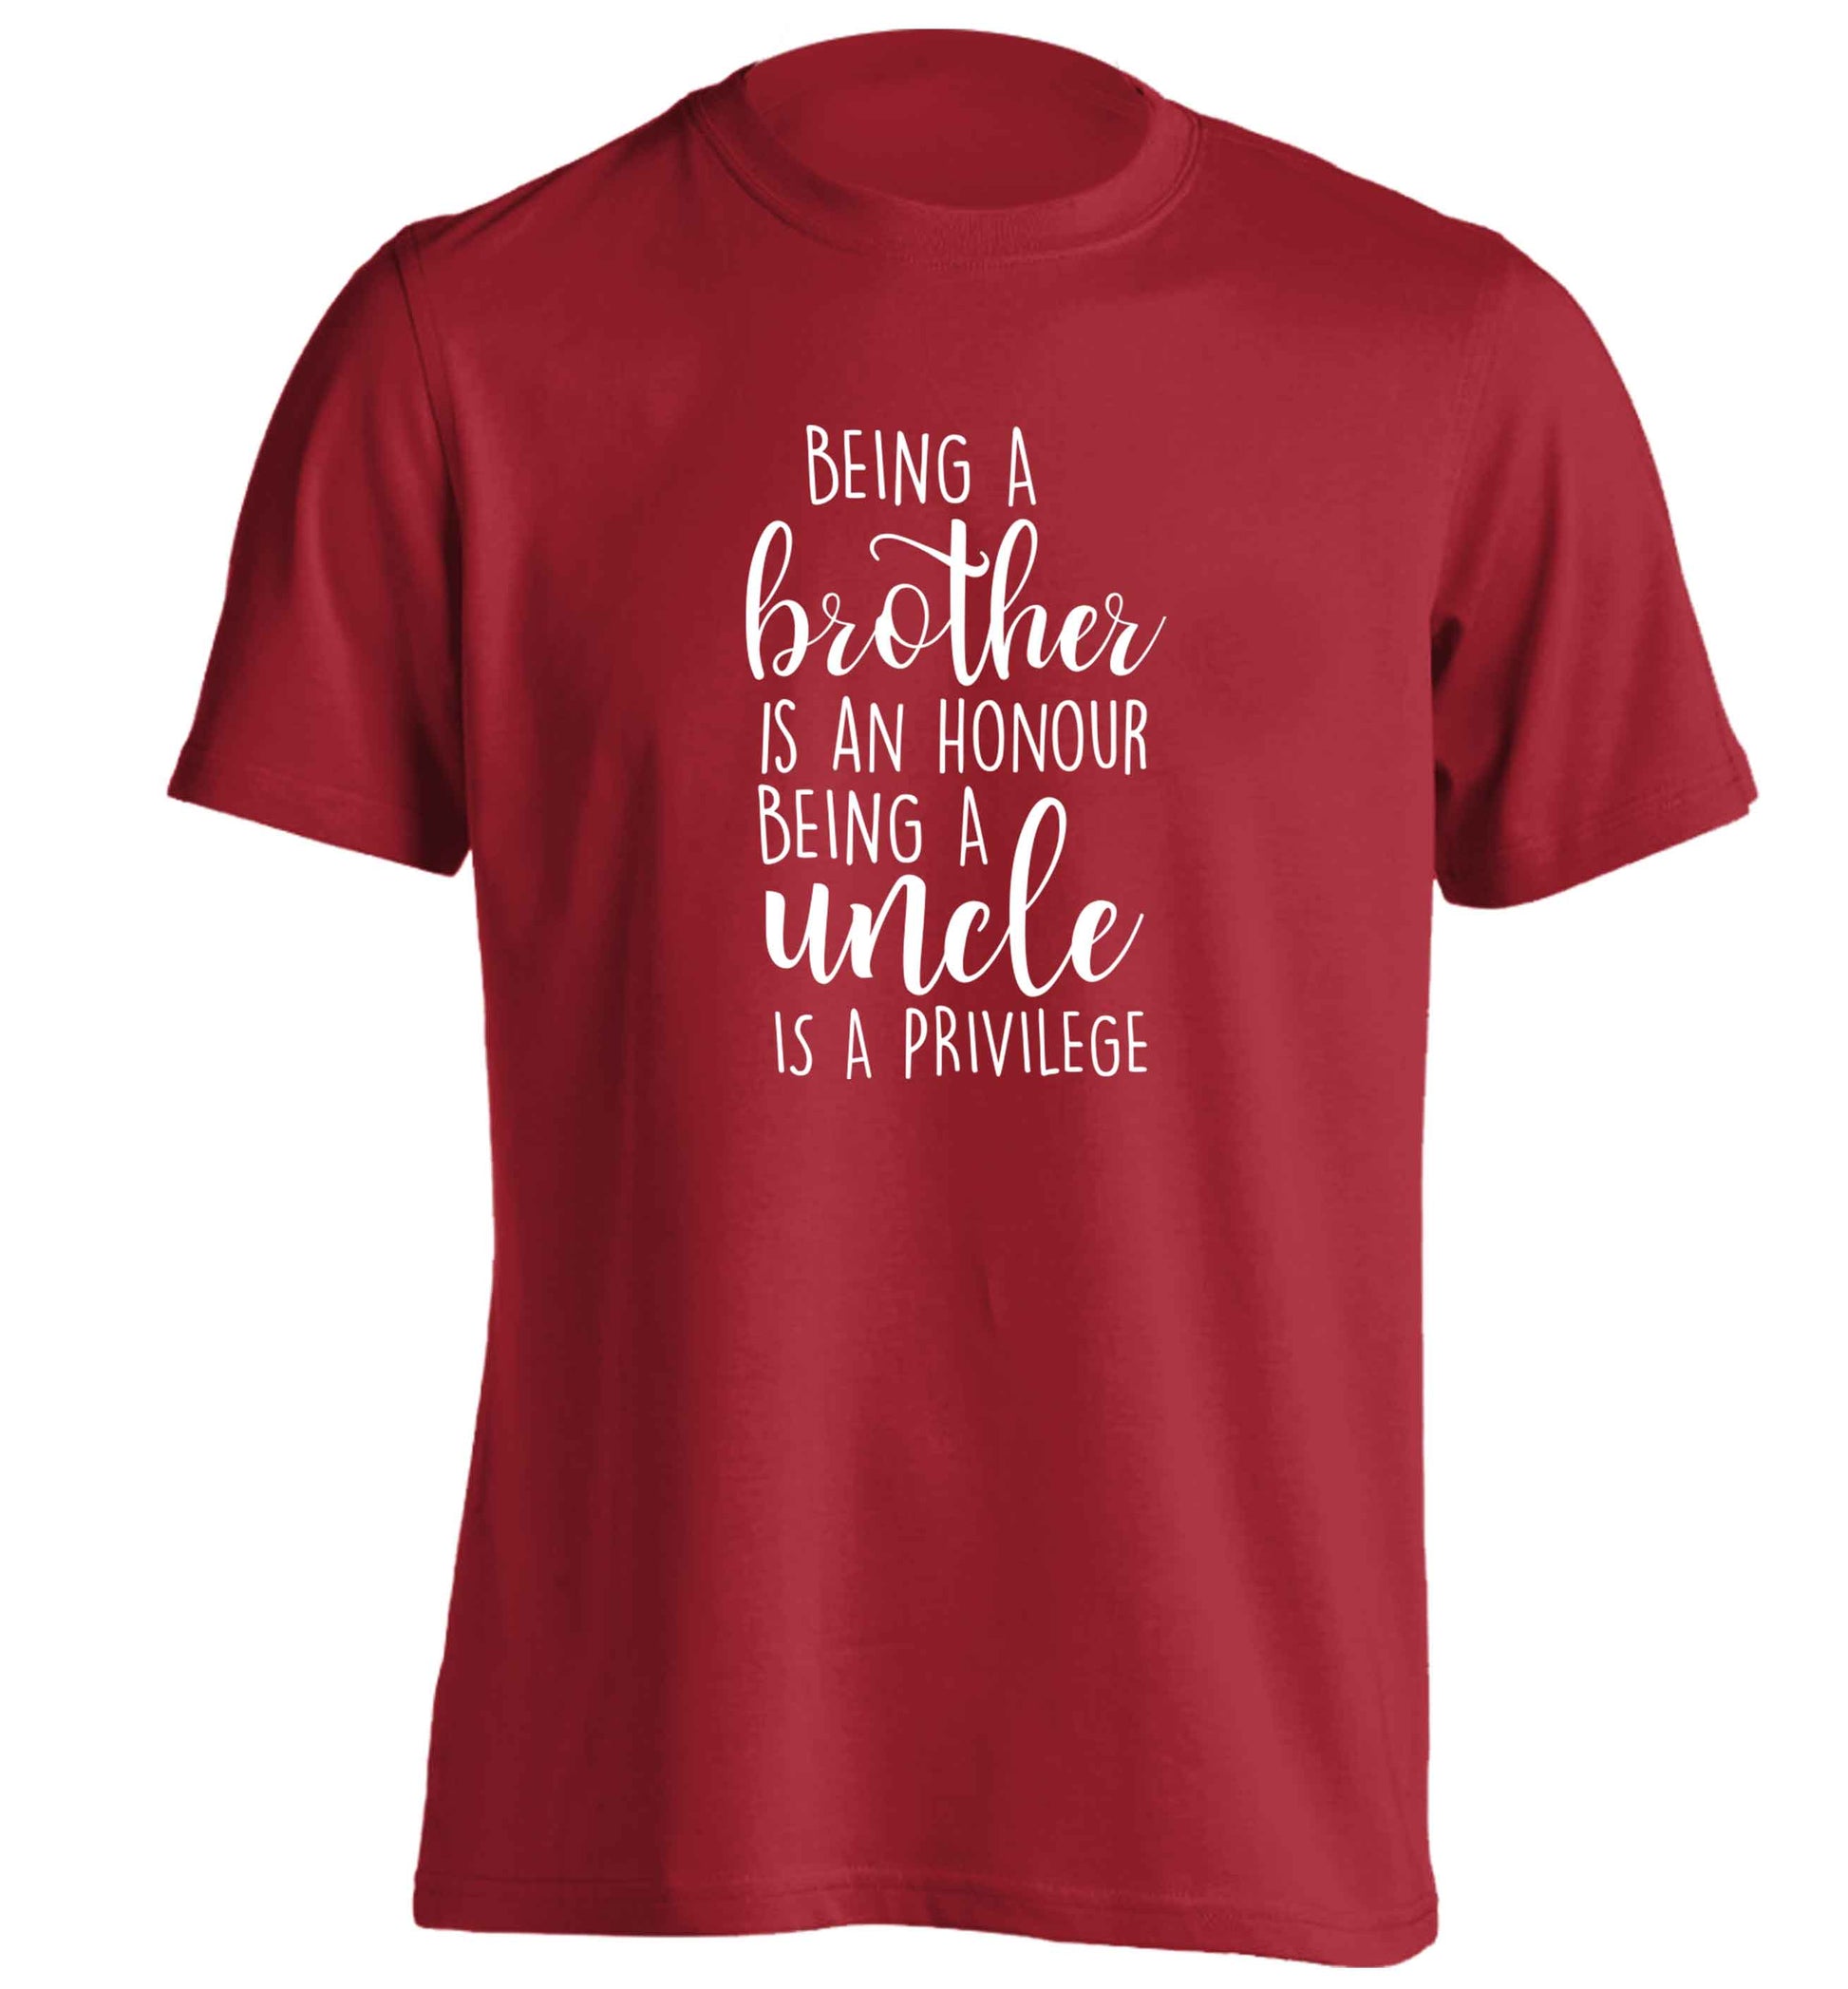 Being a brother is an honour being an uncle is a privilege adults unisex red Tshirt 2XL